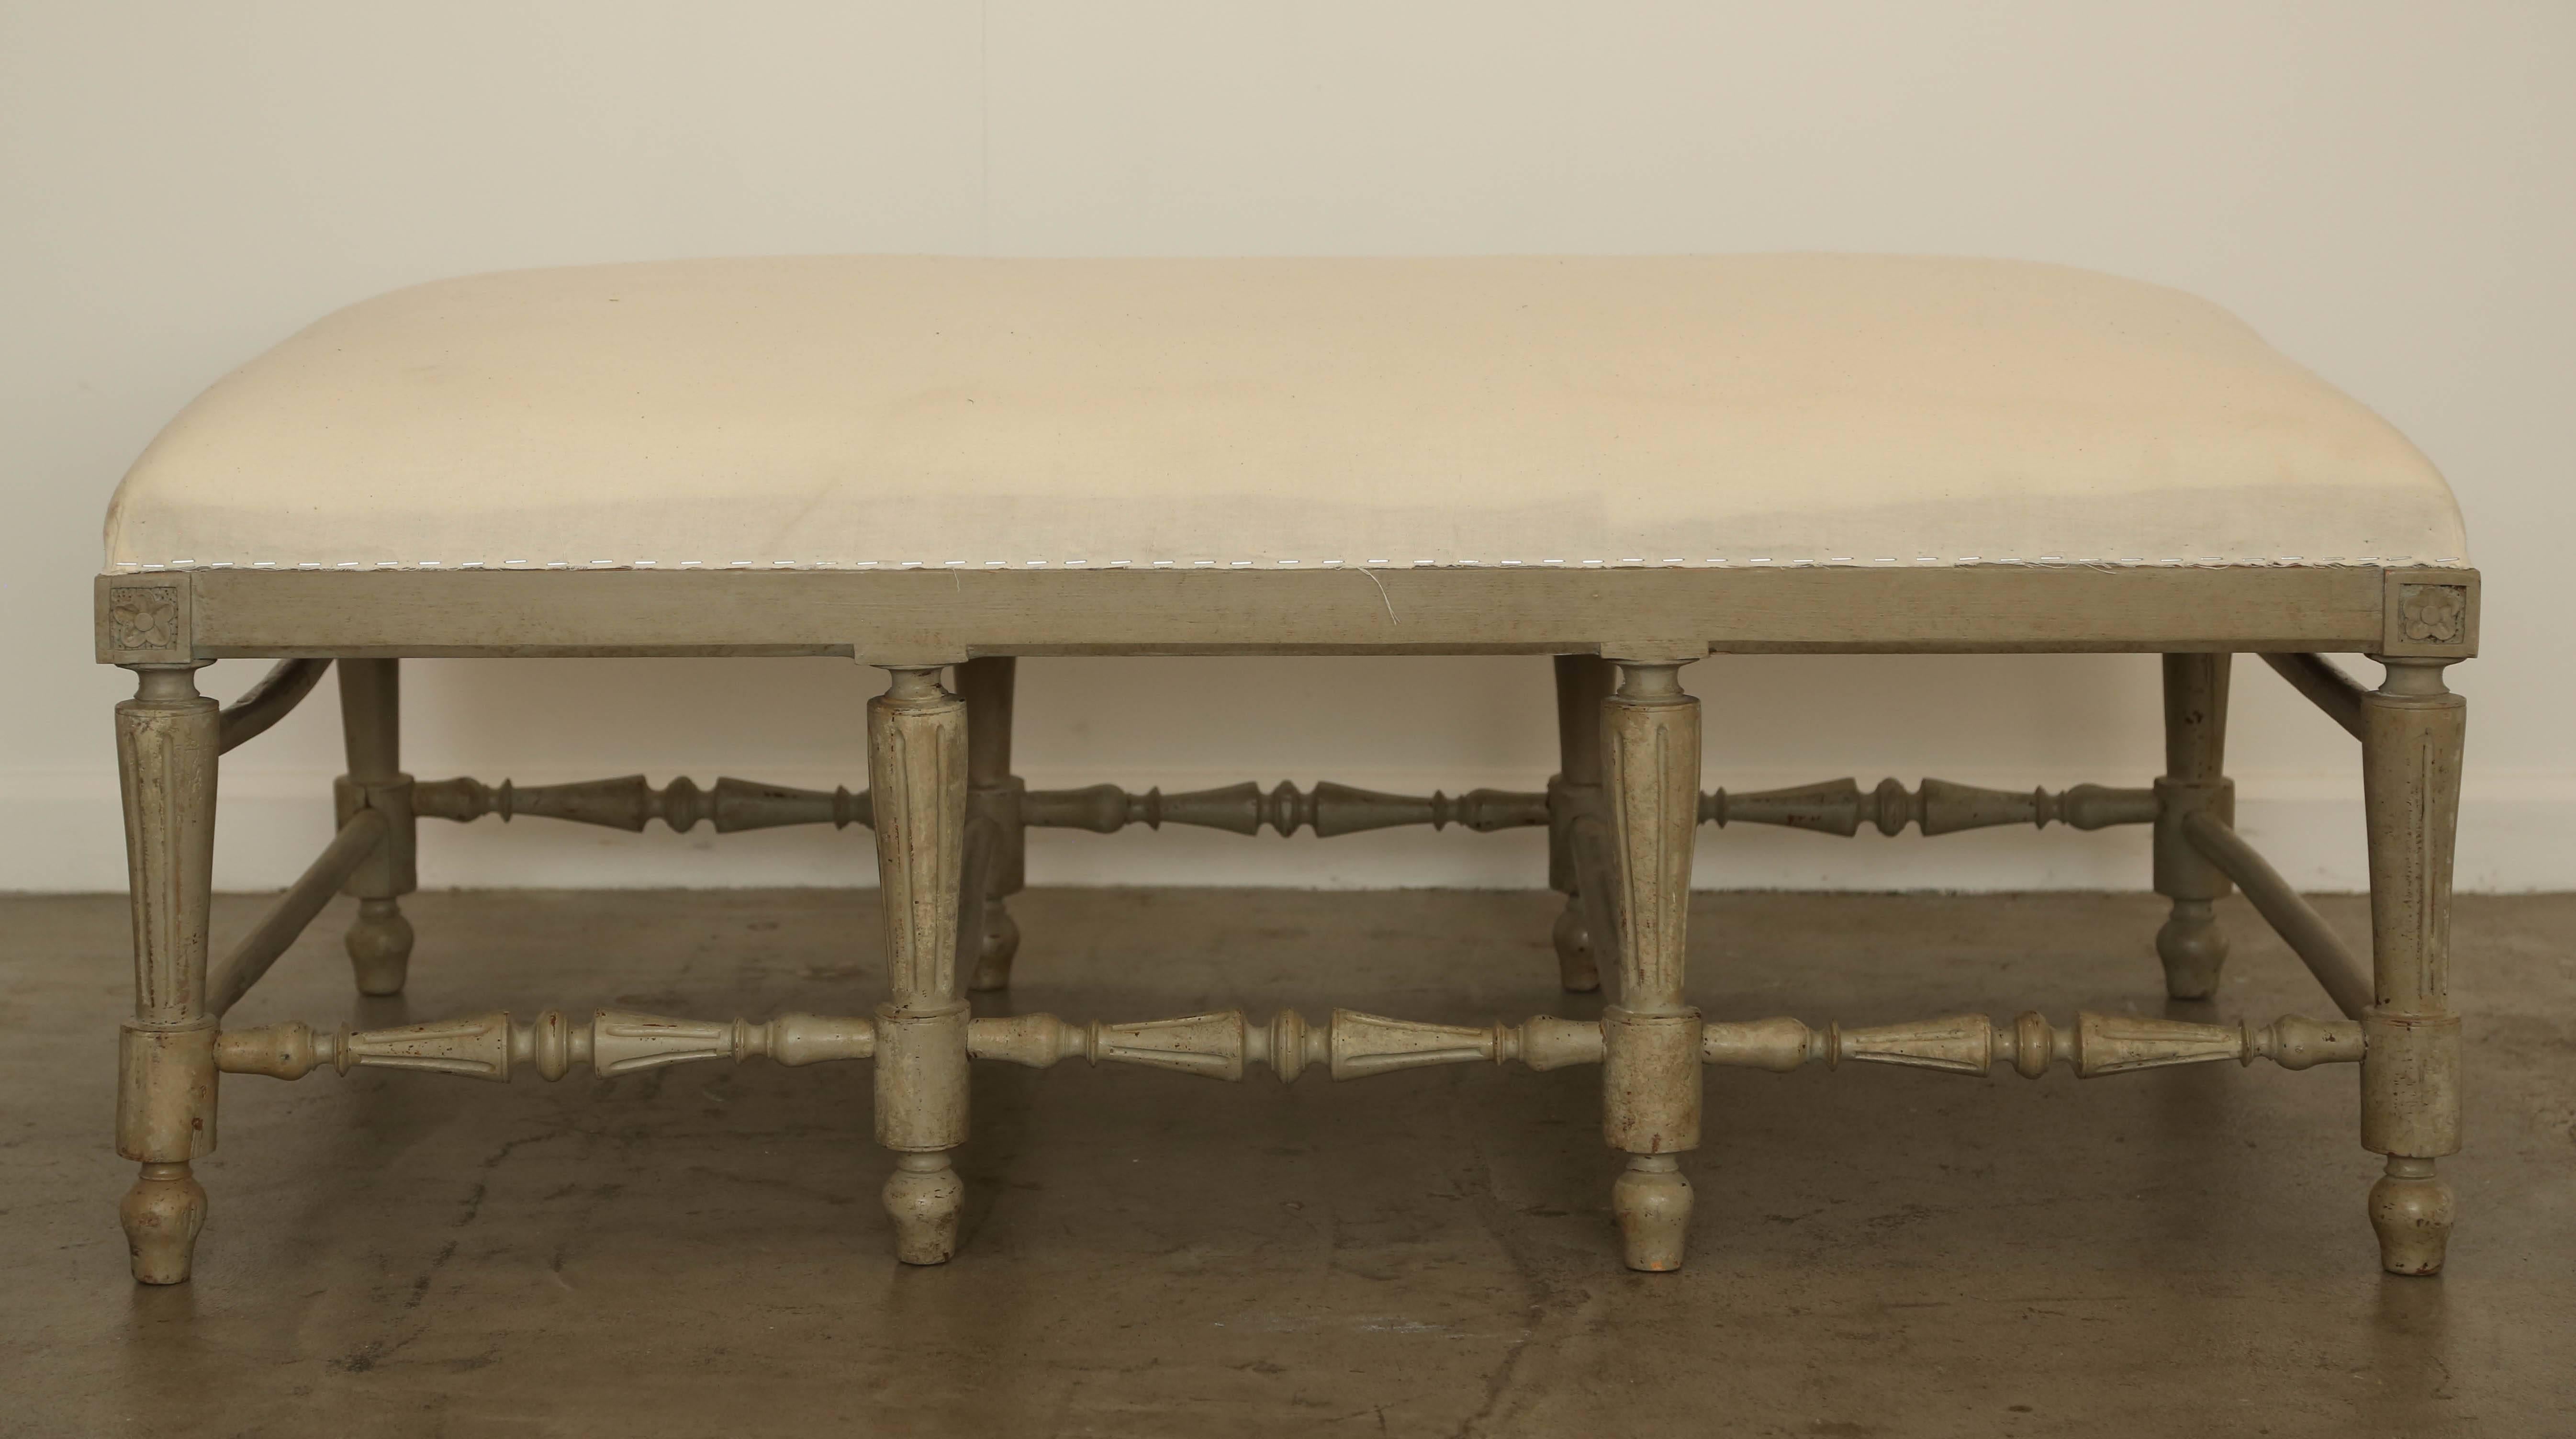 Antique Swedish Gustavian Style large rectangular bench, mid-19th century
Painted in distressed greyish-green finish, fluted and straight tapered legs with
cross stretchers some round straight shape and some turned and carved, top is
upholstered